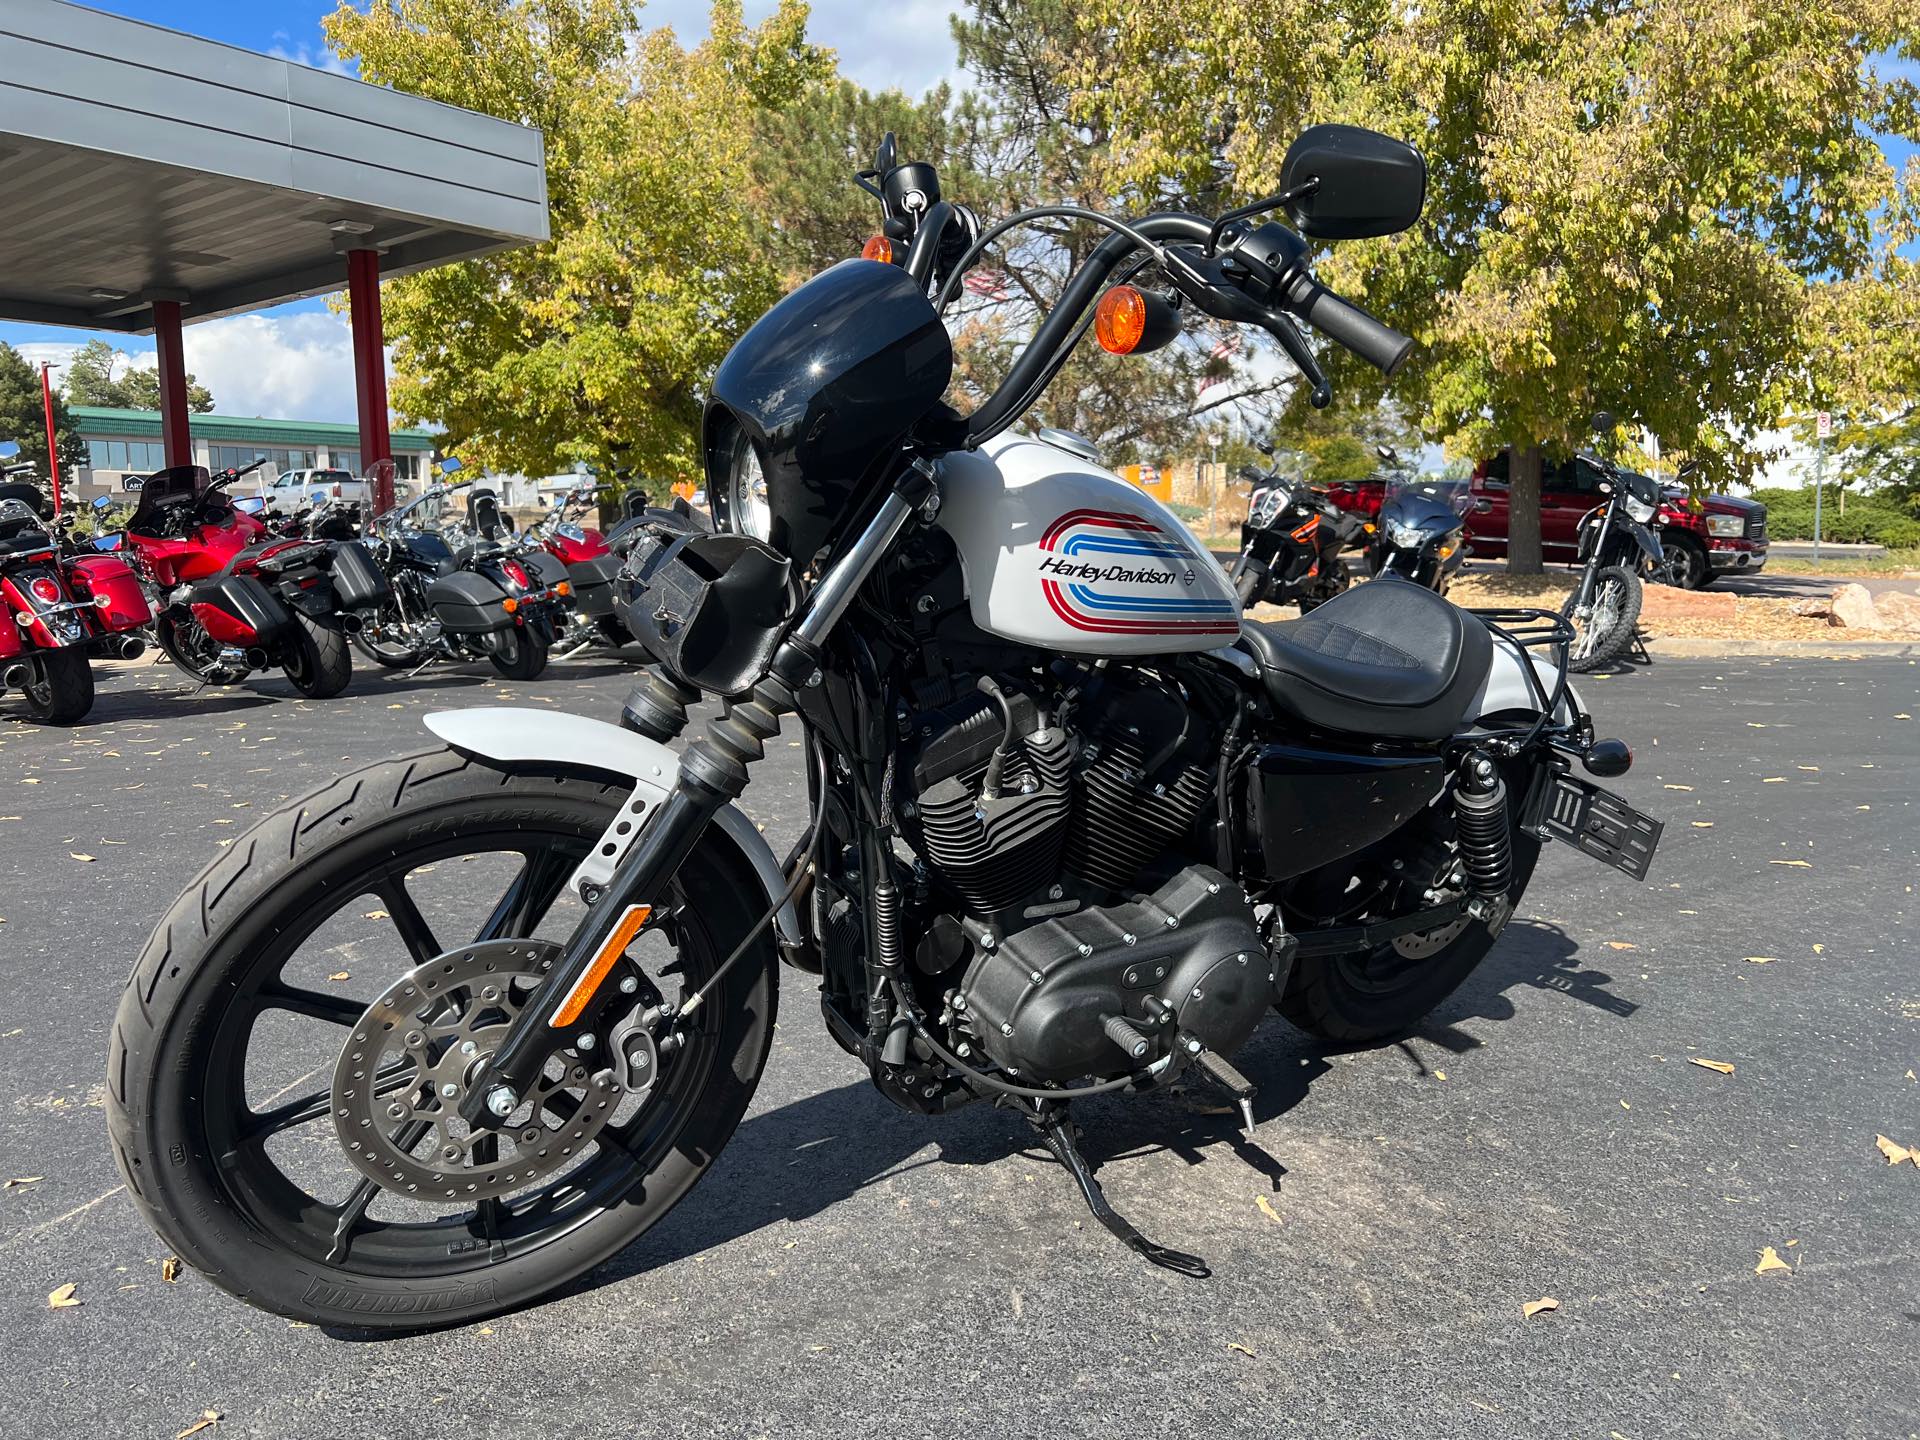 2021 Harley-Davidson Iron 1200' at Aces Motorcycles - Fort Collins